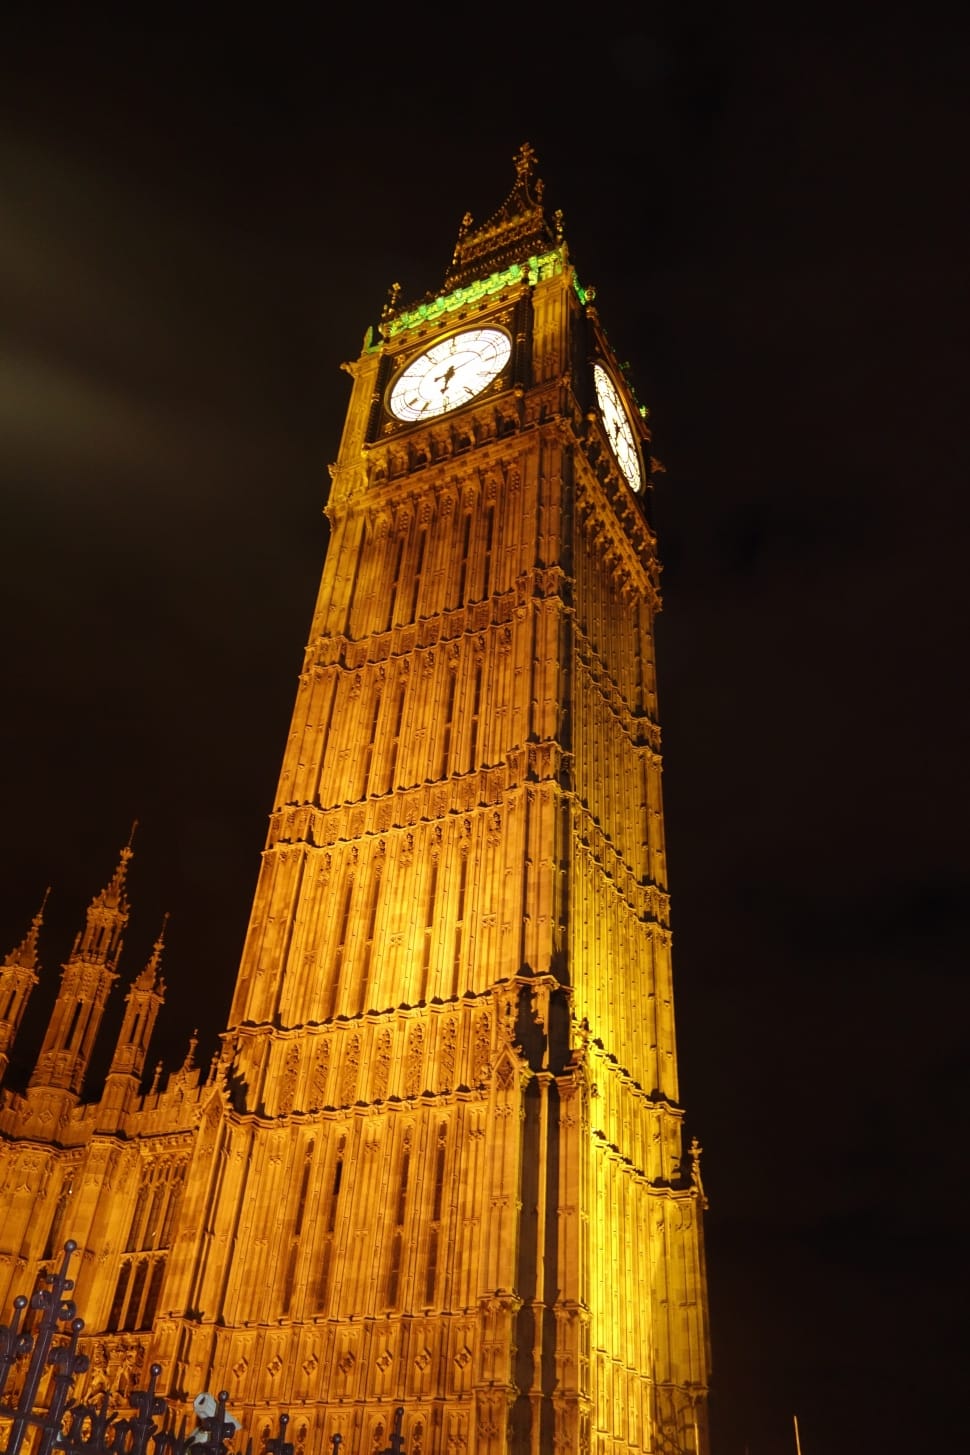 worm's eye view of Big Ben during nighttime preview